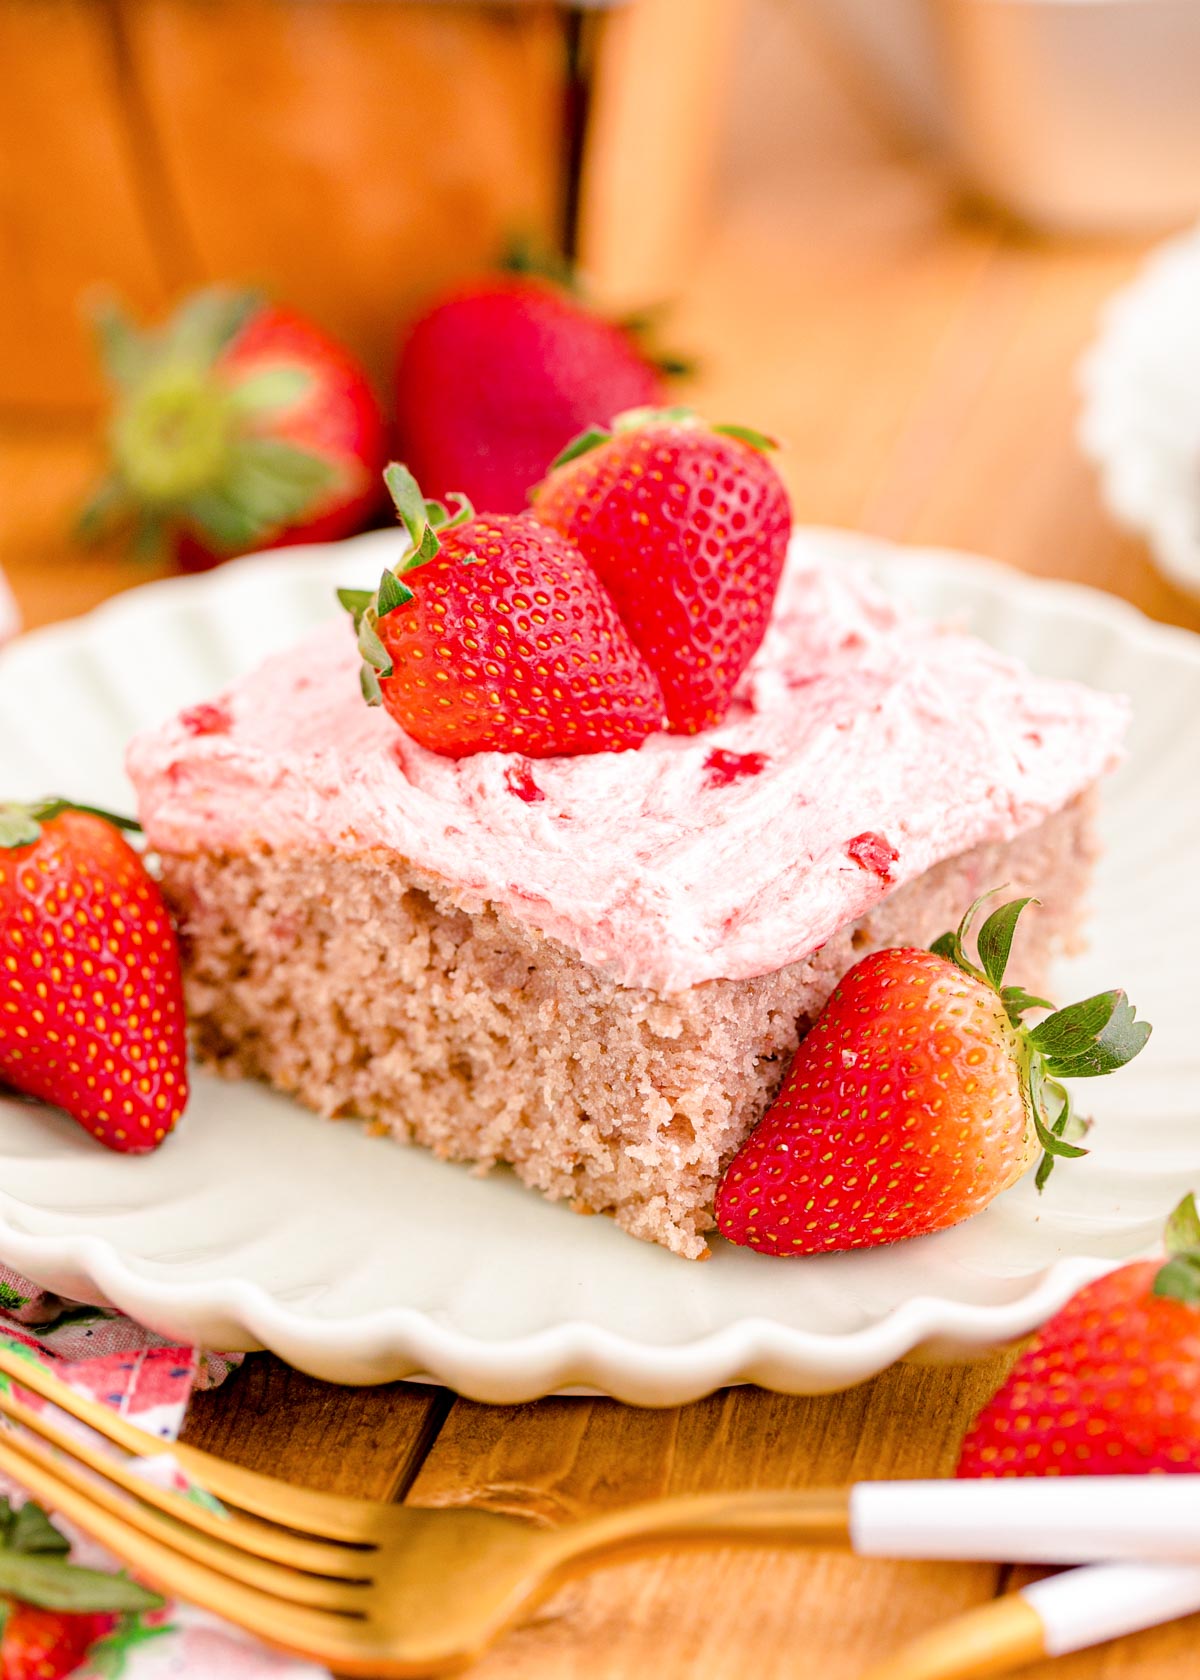 Vintage Strawberry Cake Recipe - Quiche My Grits